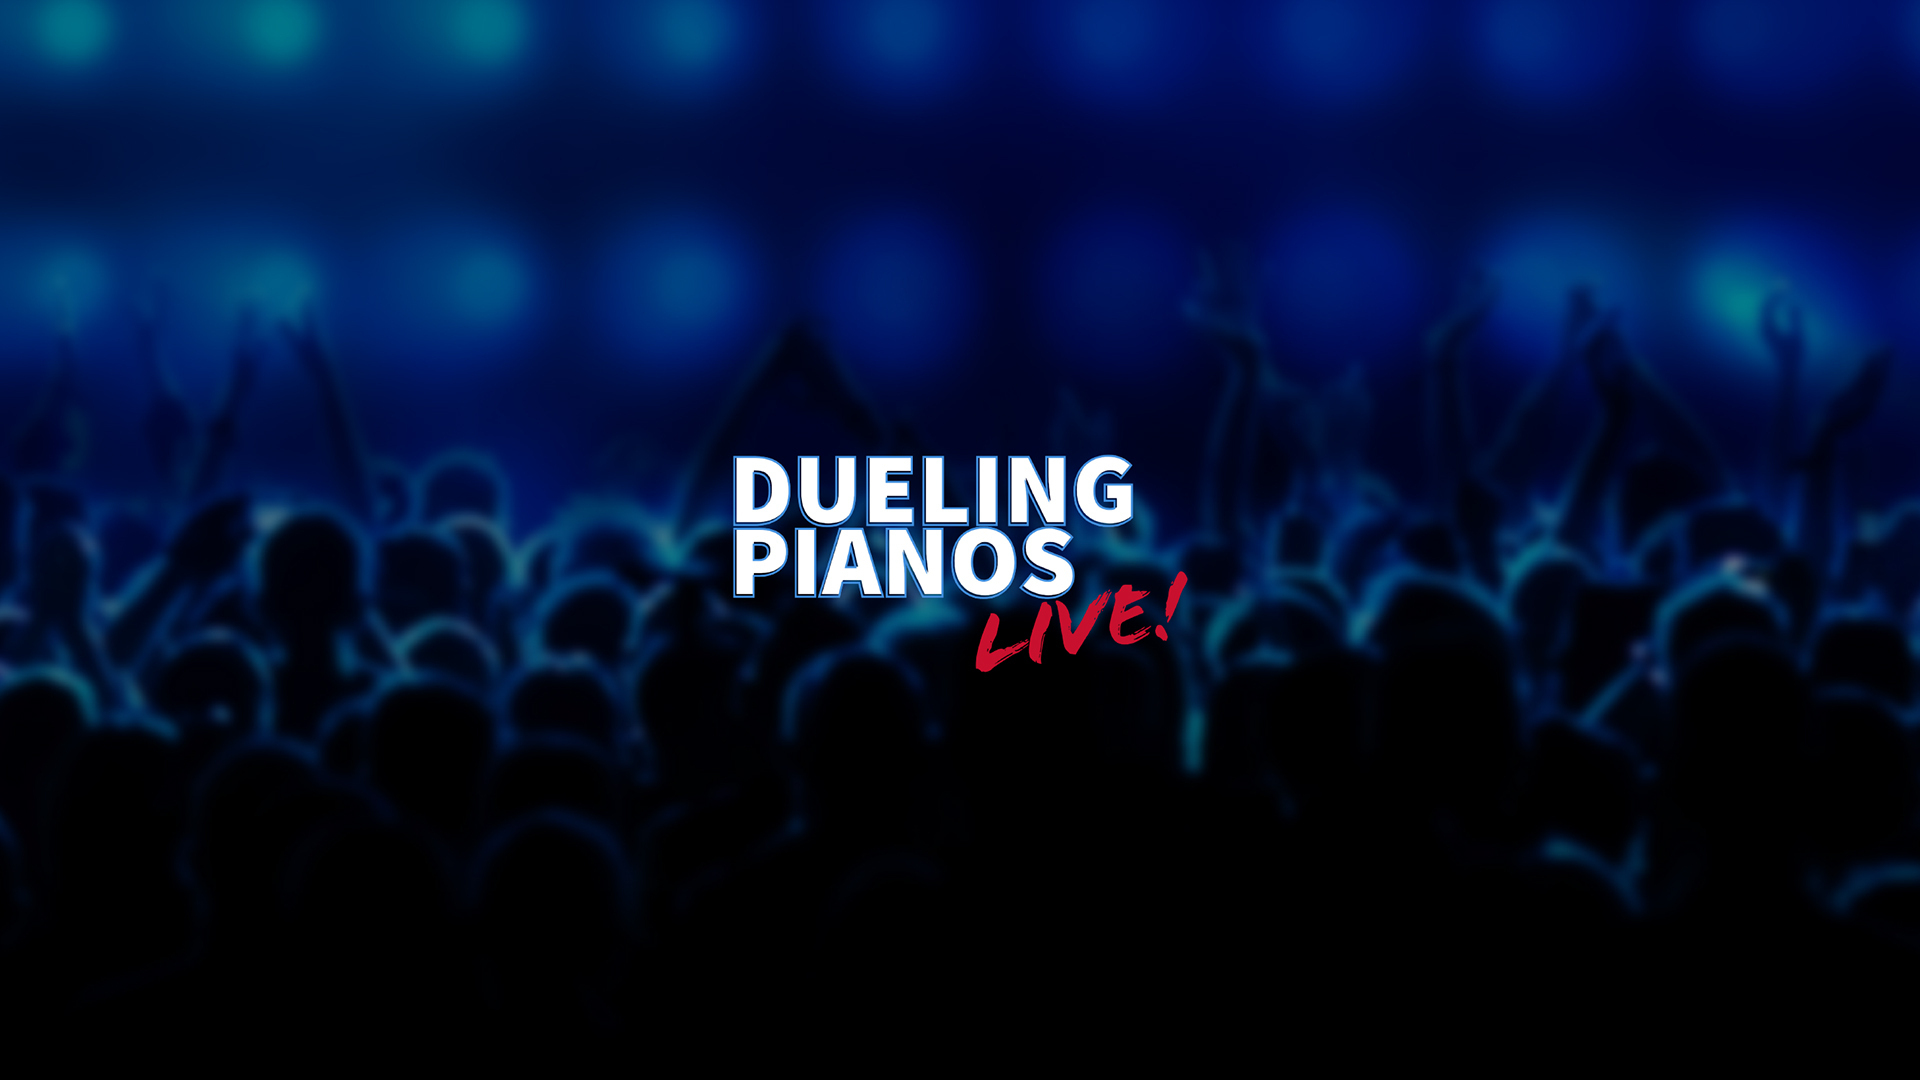 Dueling Pianos Live! is back at The Brook on March 29th, Seabrook, New Hampshire, United States